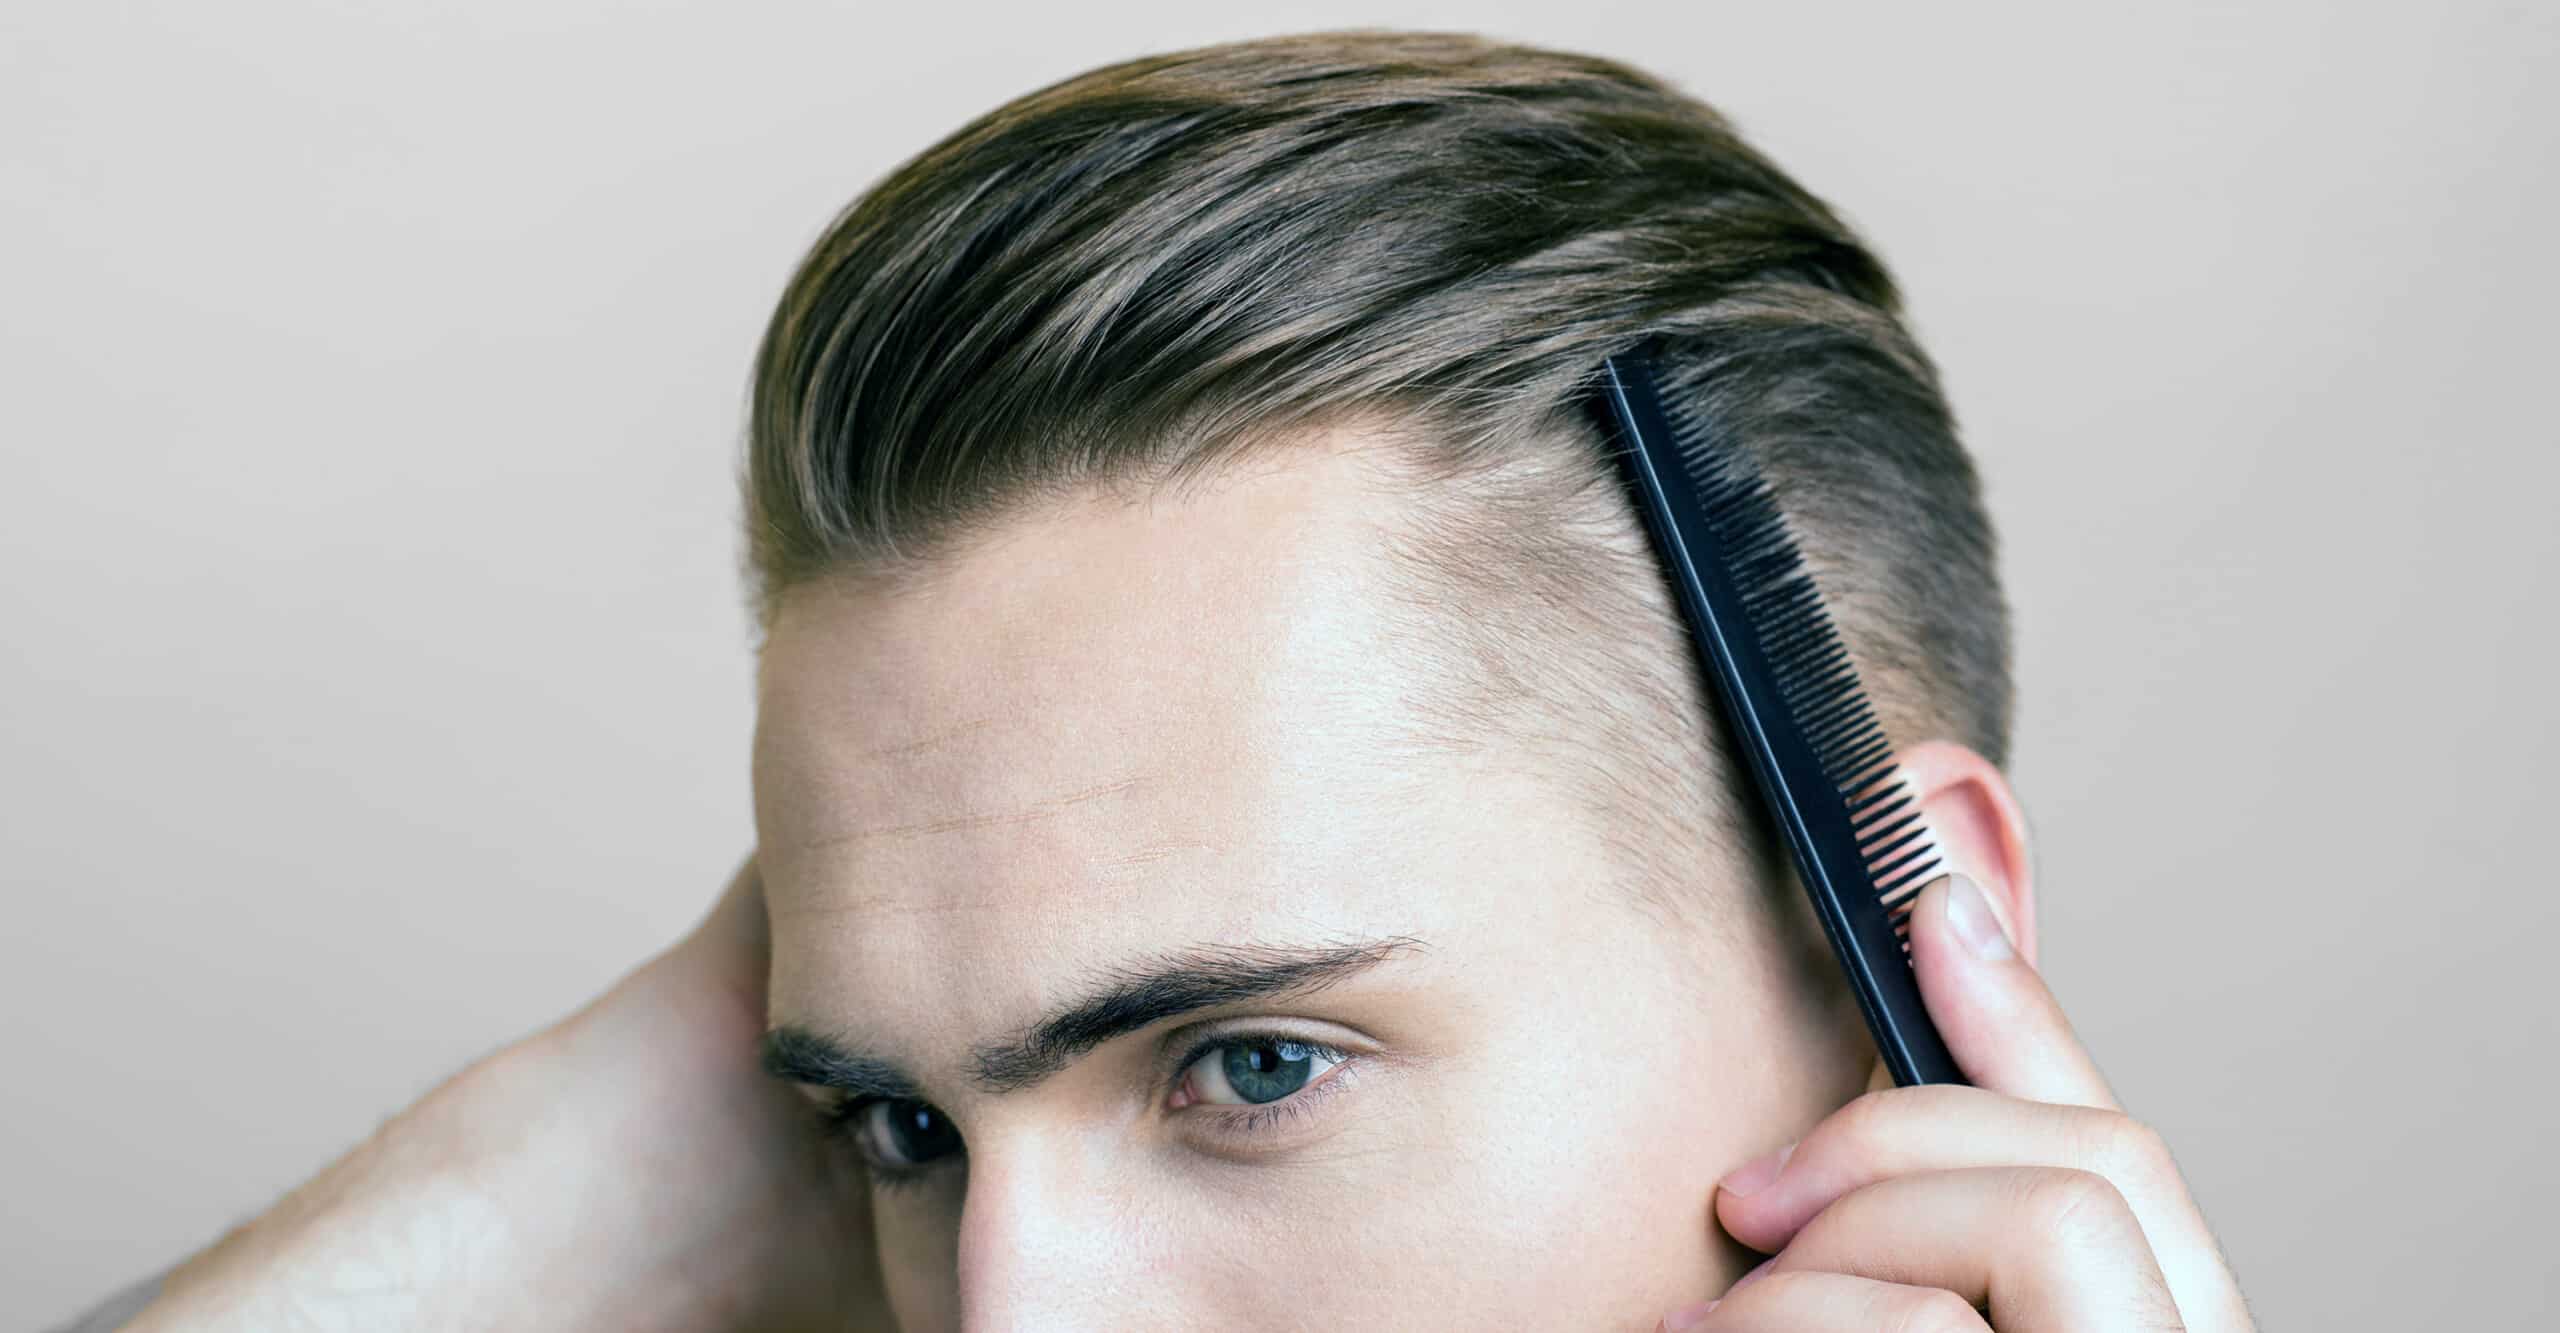 25 Dapper Hairstyles for Men With Thin Hair - StyleSeat